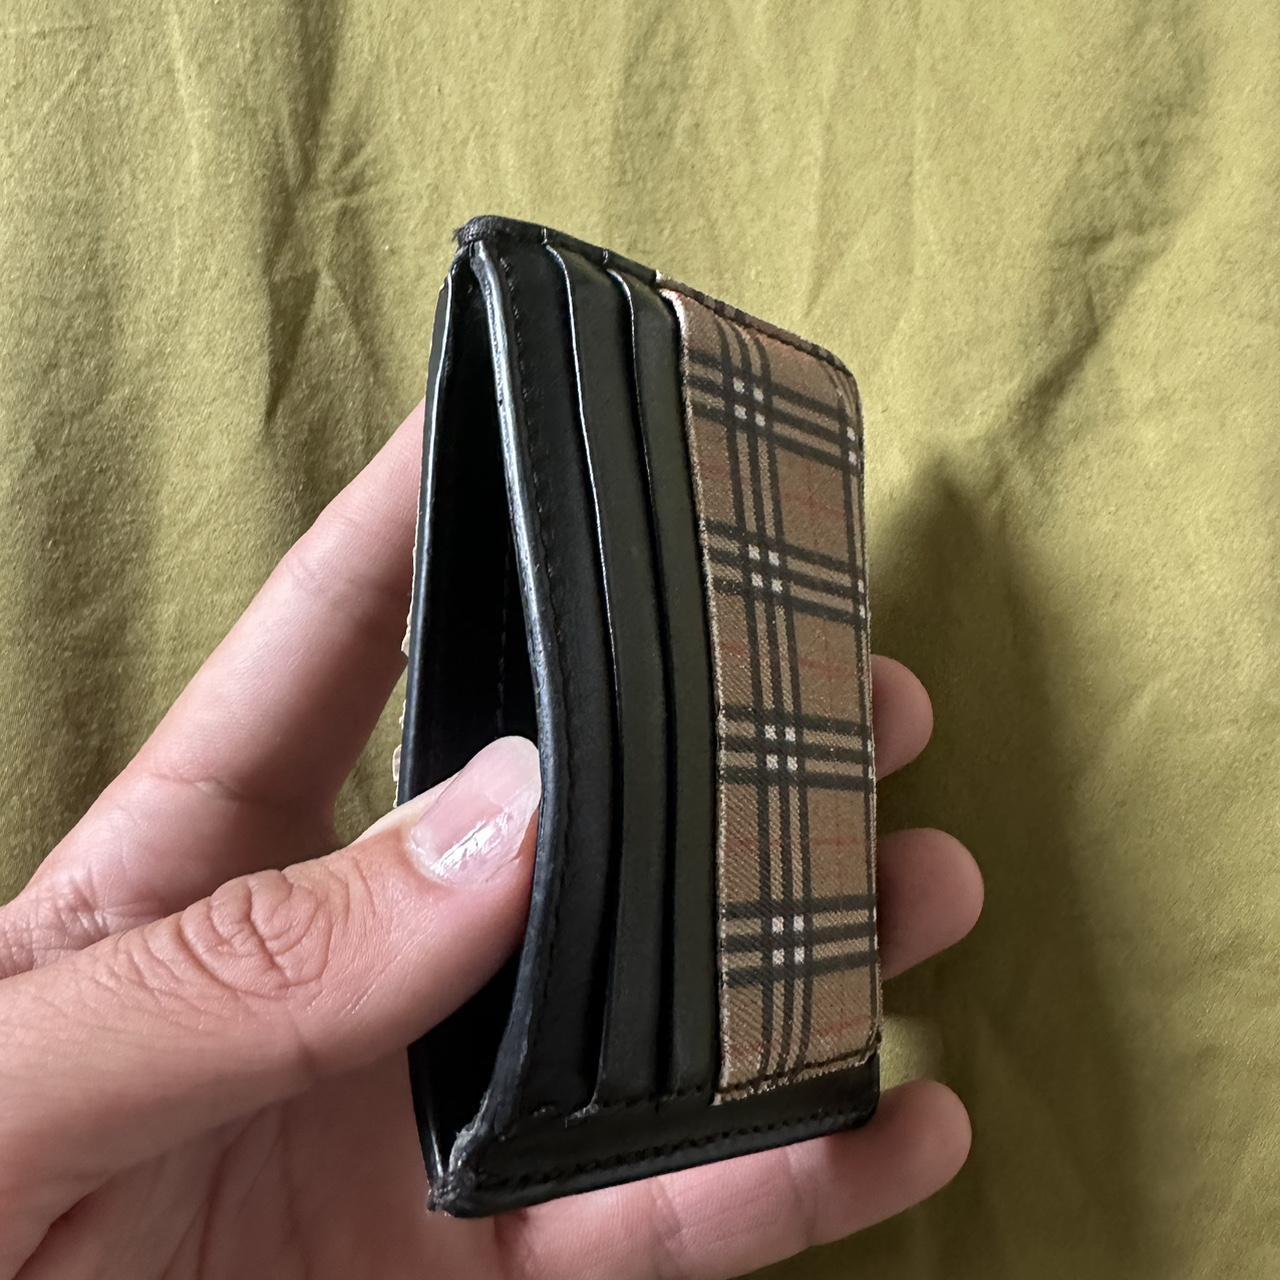 BURBERRY Leather card holder. #burberry #